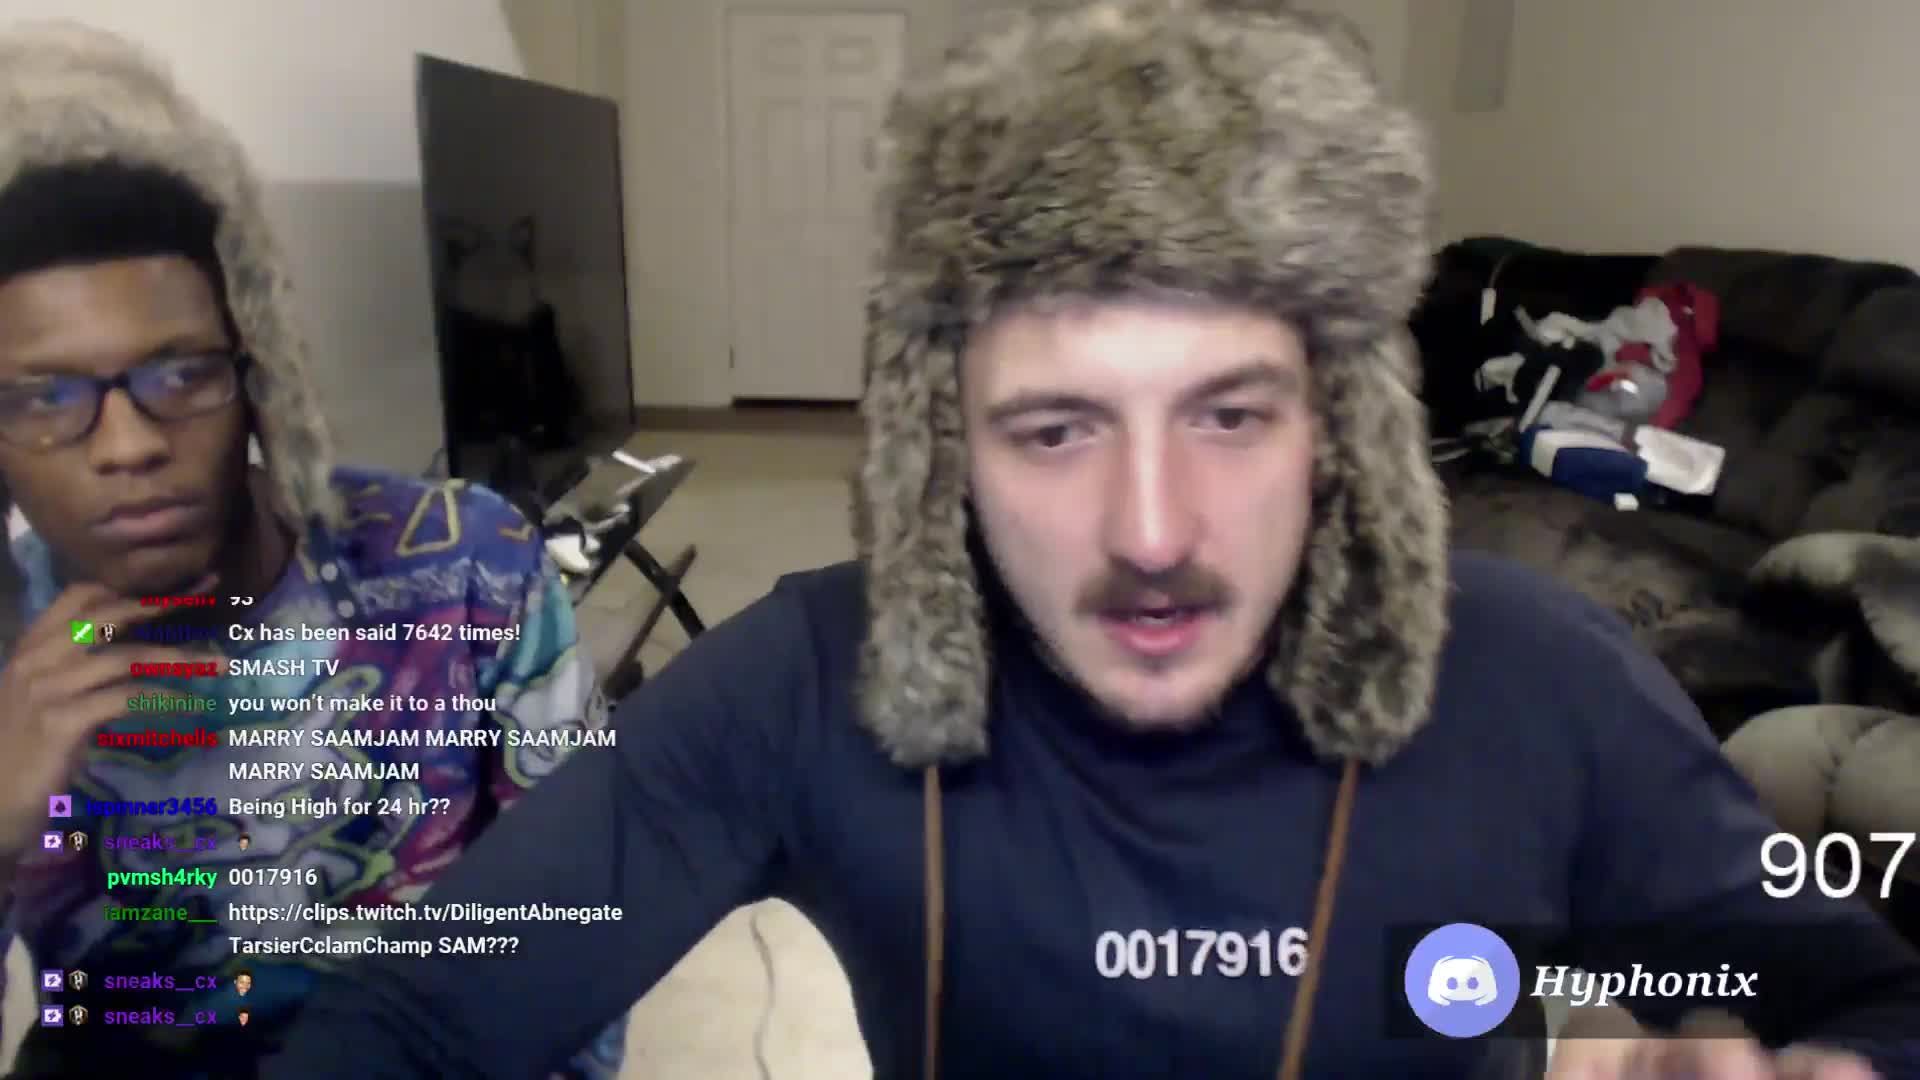 hyphonix banned